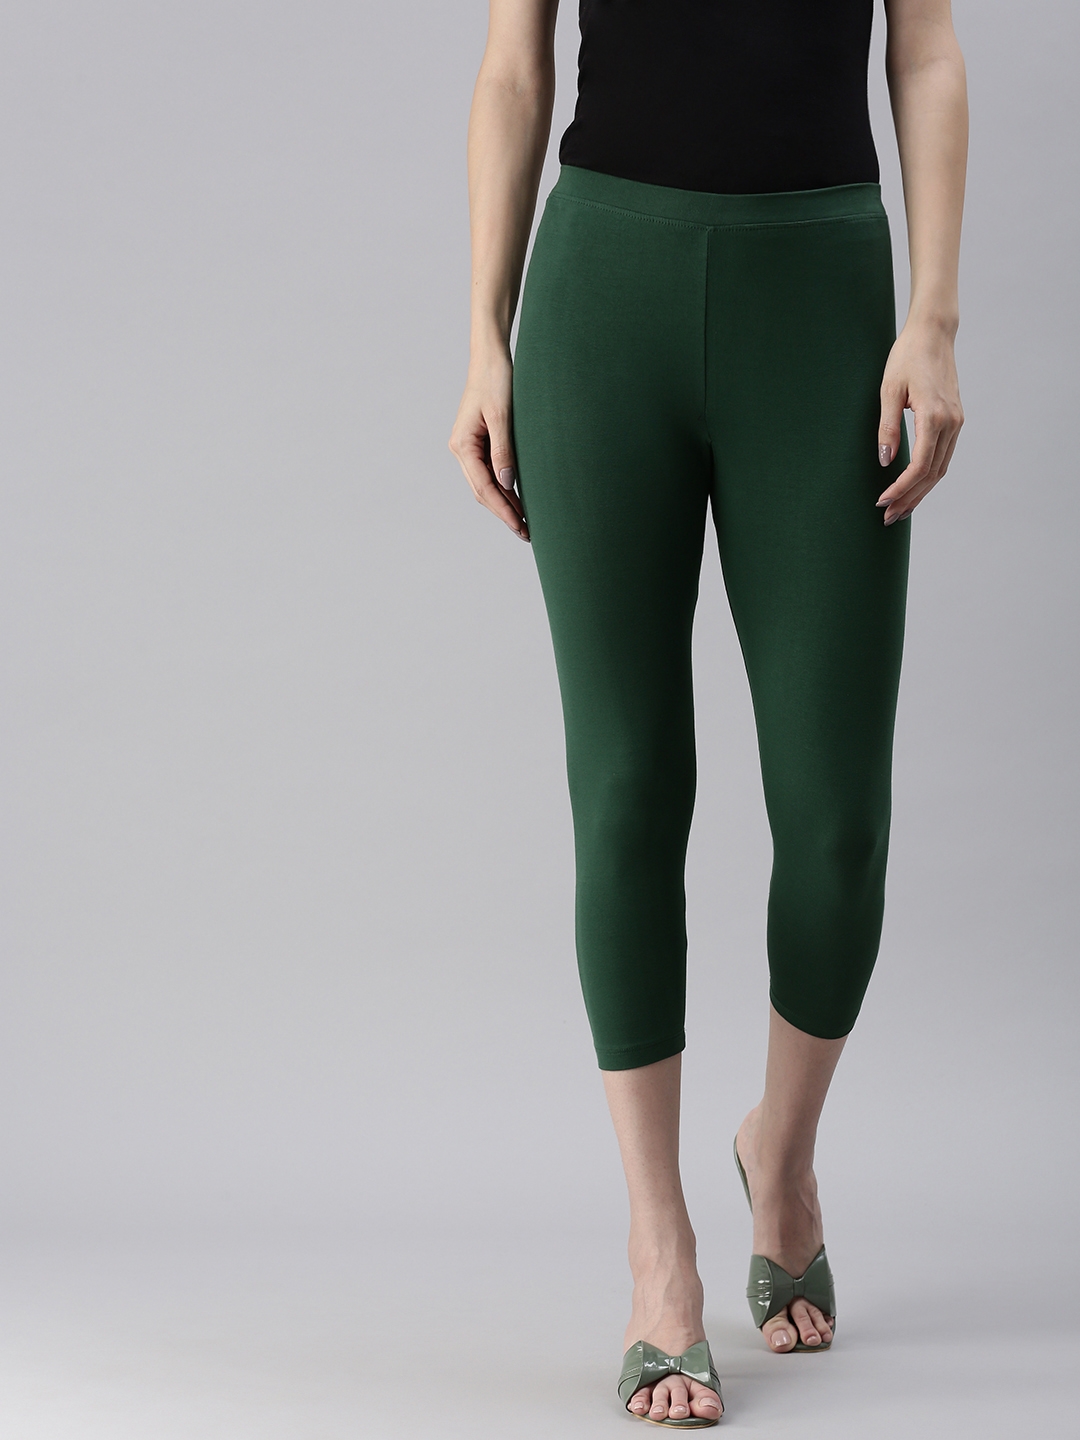 Kryptic | Kryptic Women Cotton Stretched Solid Bottle green colour Mid-Ankle length Legging